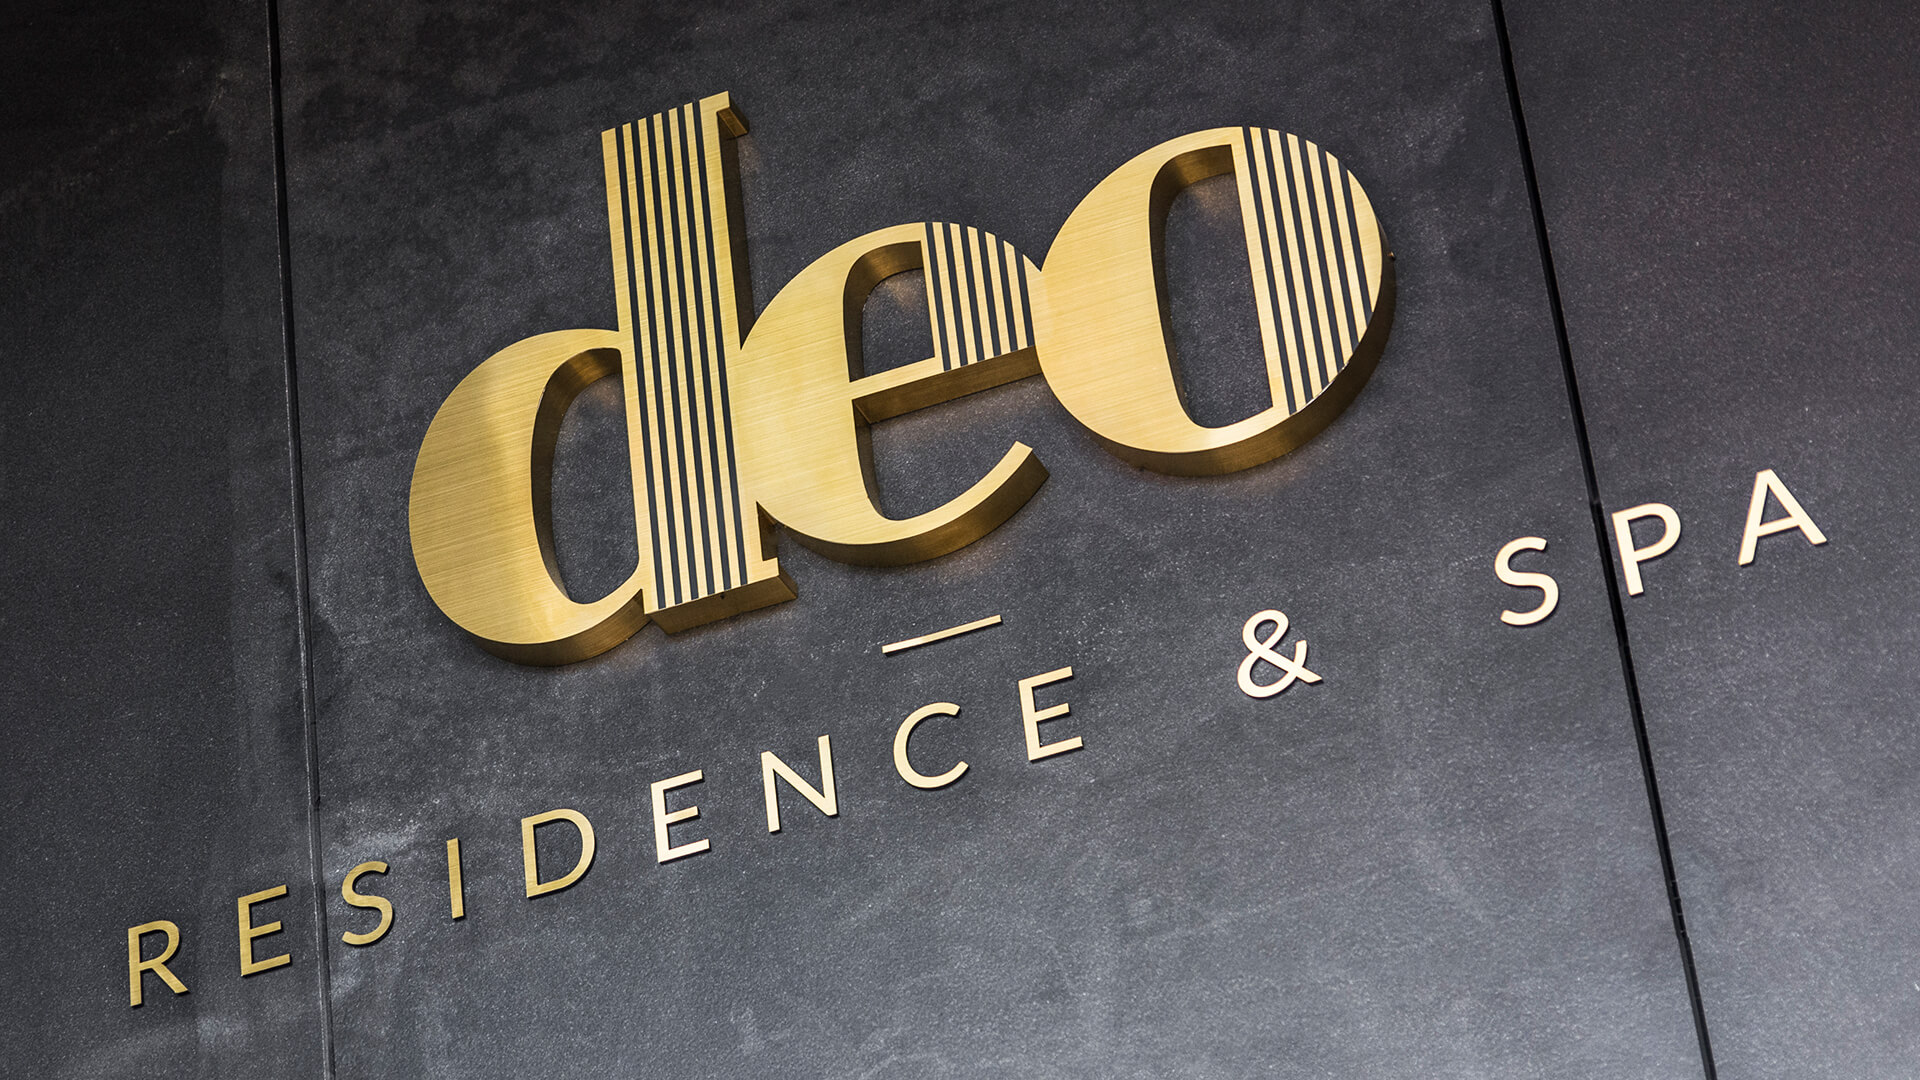 deo residenz deo hotel spa - deo-residence-lettering-from-safe-steel-brushed-lettering-over-entry-to-office-building-lettering-height-mounted-to-the-wall-lettering-on-capitals-lettering-on-desk-logo-firmowe-gdansk